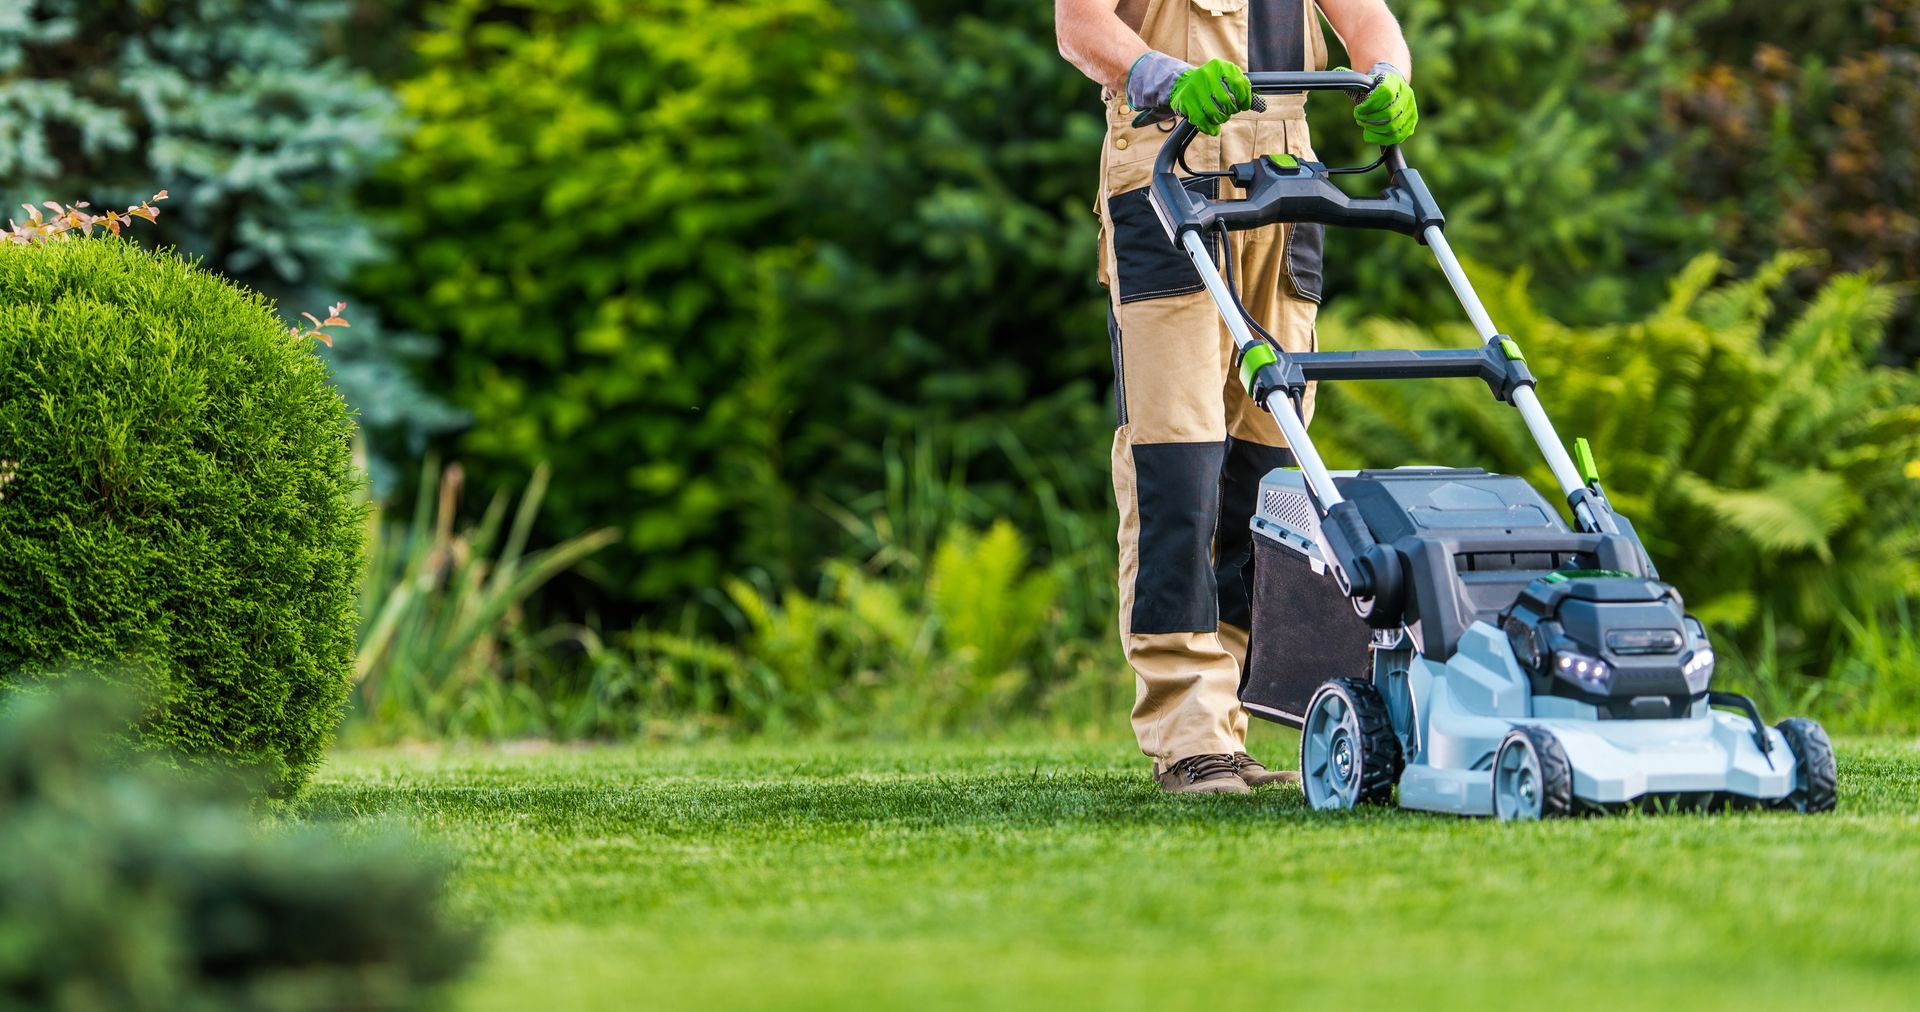 Green Lawns Solutions Shares Lawn Mowing Dos and Don’ts: Common Mistakes to Avoid in Florida’s Unique Climate